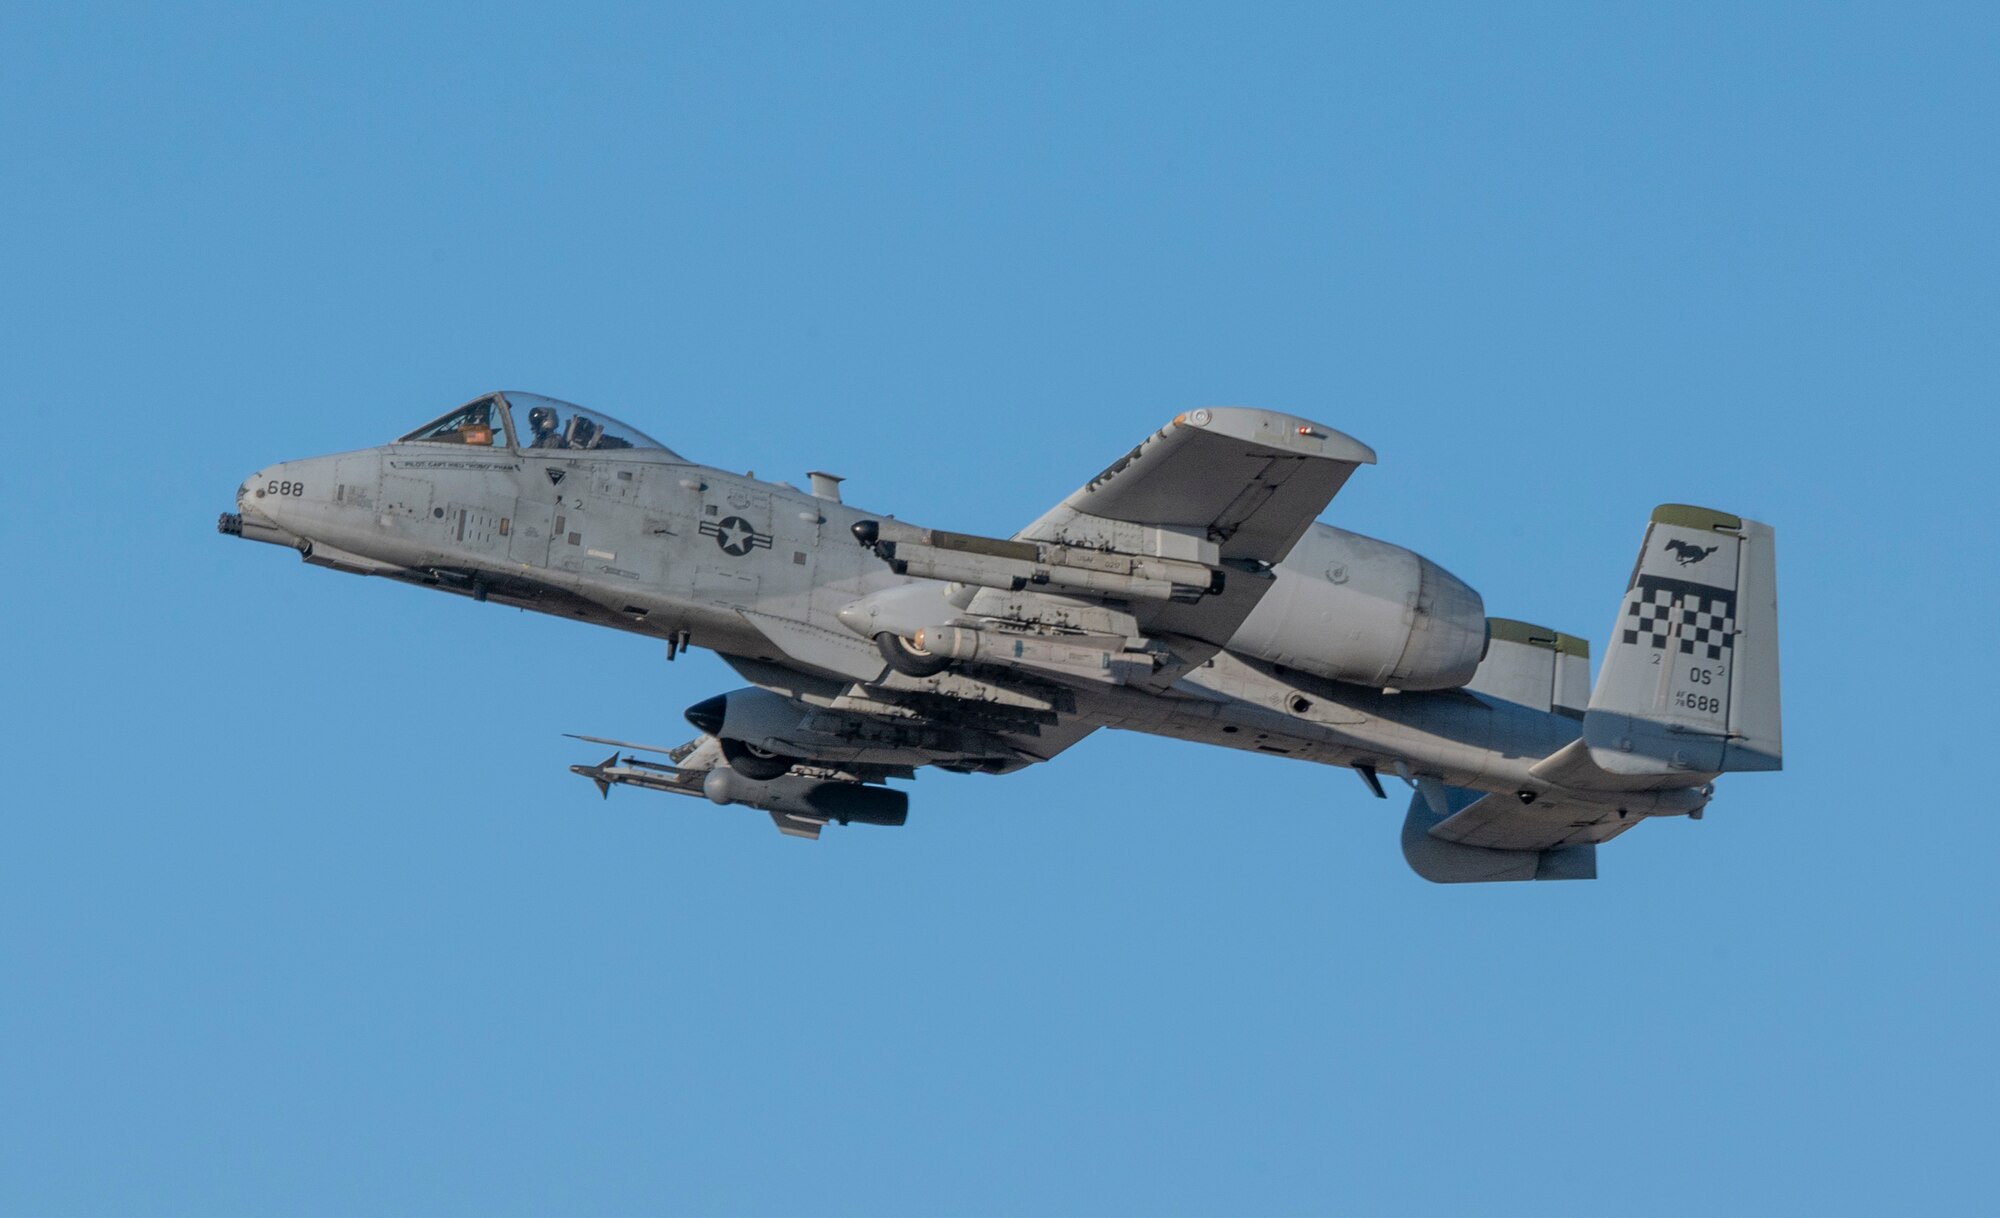 An A-10C Thunderbolt II, assigned to the 25th Fighter Squadron, takes off during a routine training event at Osan Air Base, Republic of Korea, Jan. 30, 2023. The A-10 Thunderbolt or “Warthog” made its first flight in 1972 filling the role of a close air support aircraft. (U.S. Air Force Photo by Airman 1st Class Aaron Edwards)